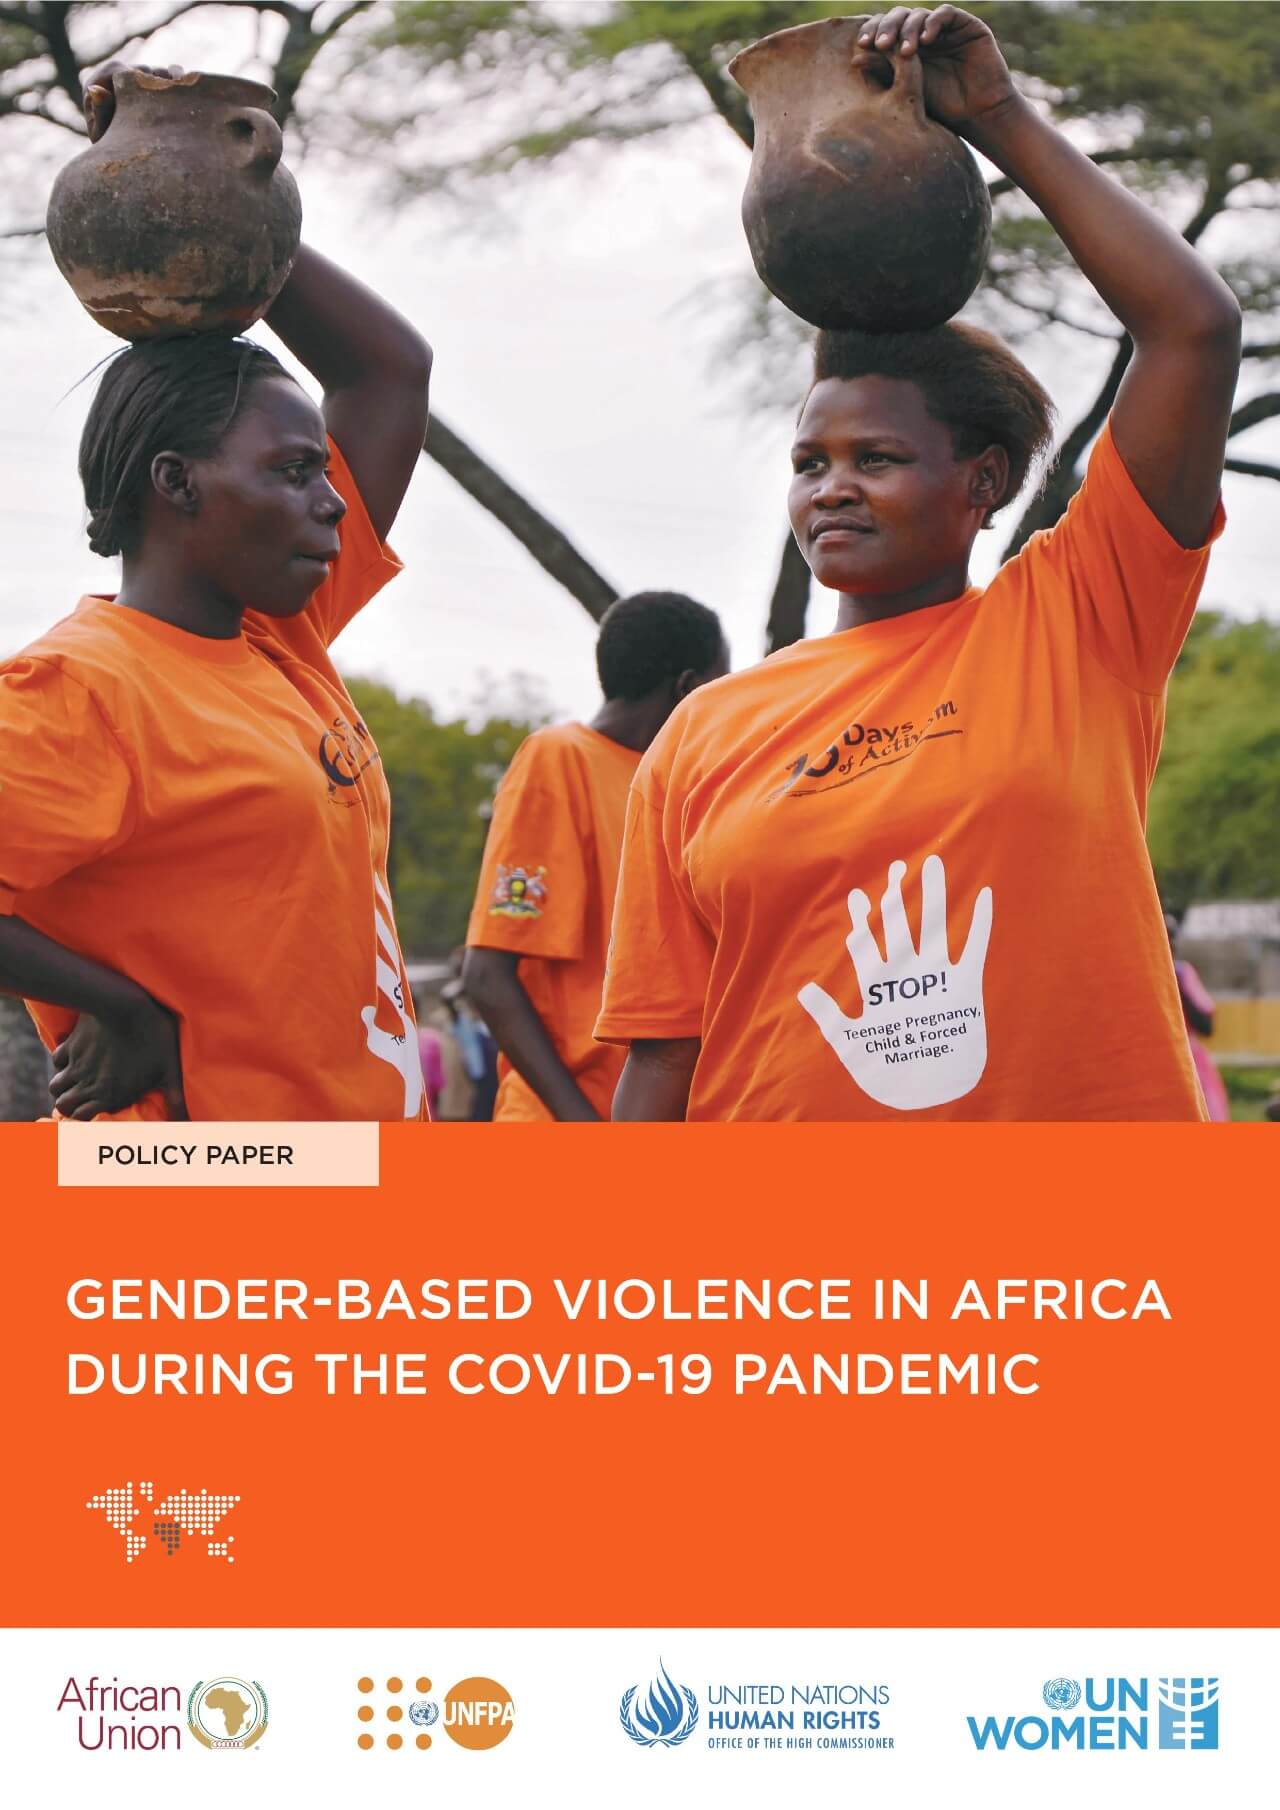 Policy Paper- GBV in Africa during COVID-19 pandemic